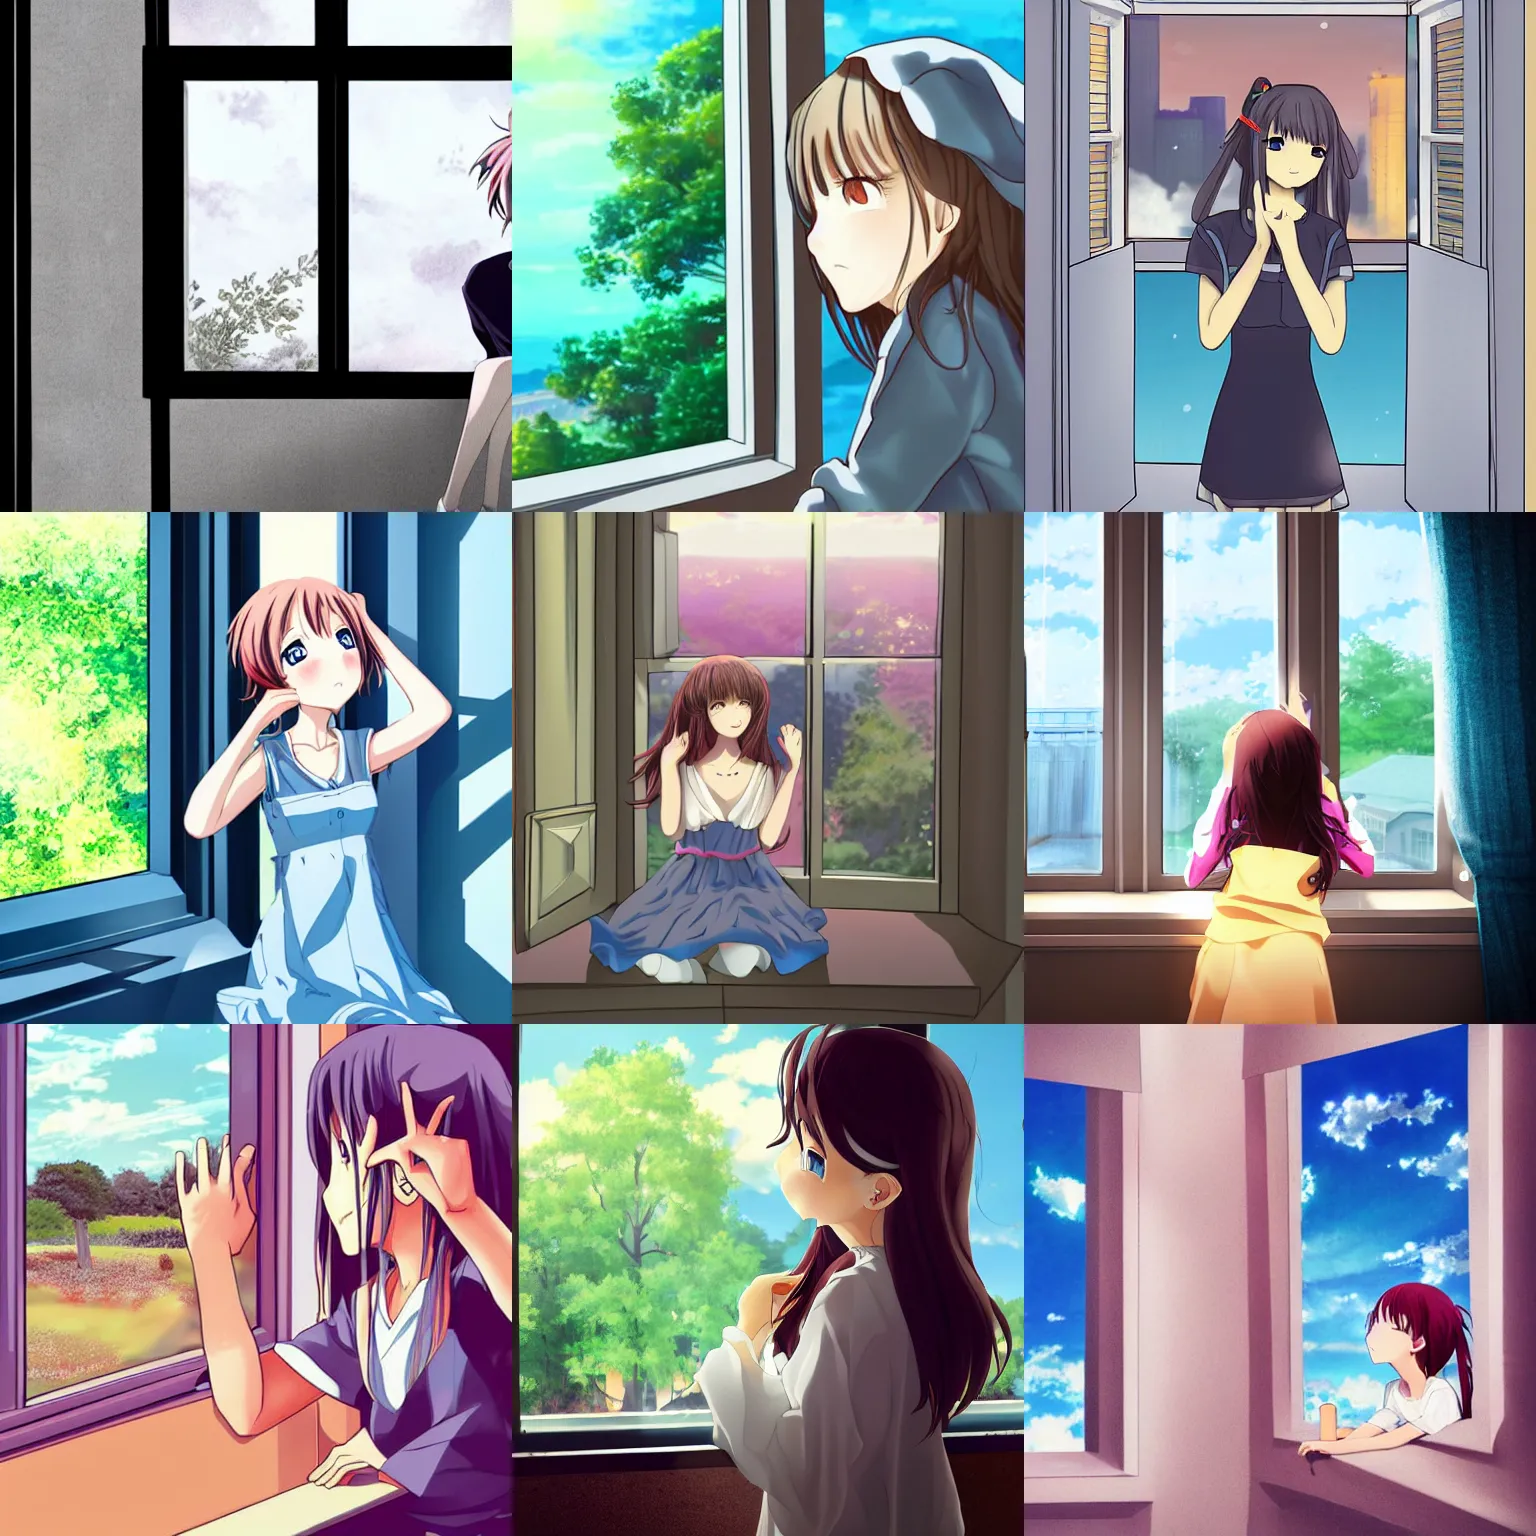 prompthunt: An anime girl lying in bed, looking out the window at the  cityscape, trending pixiv anime art